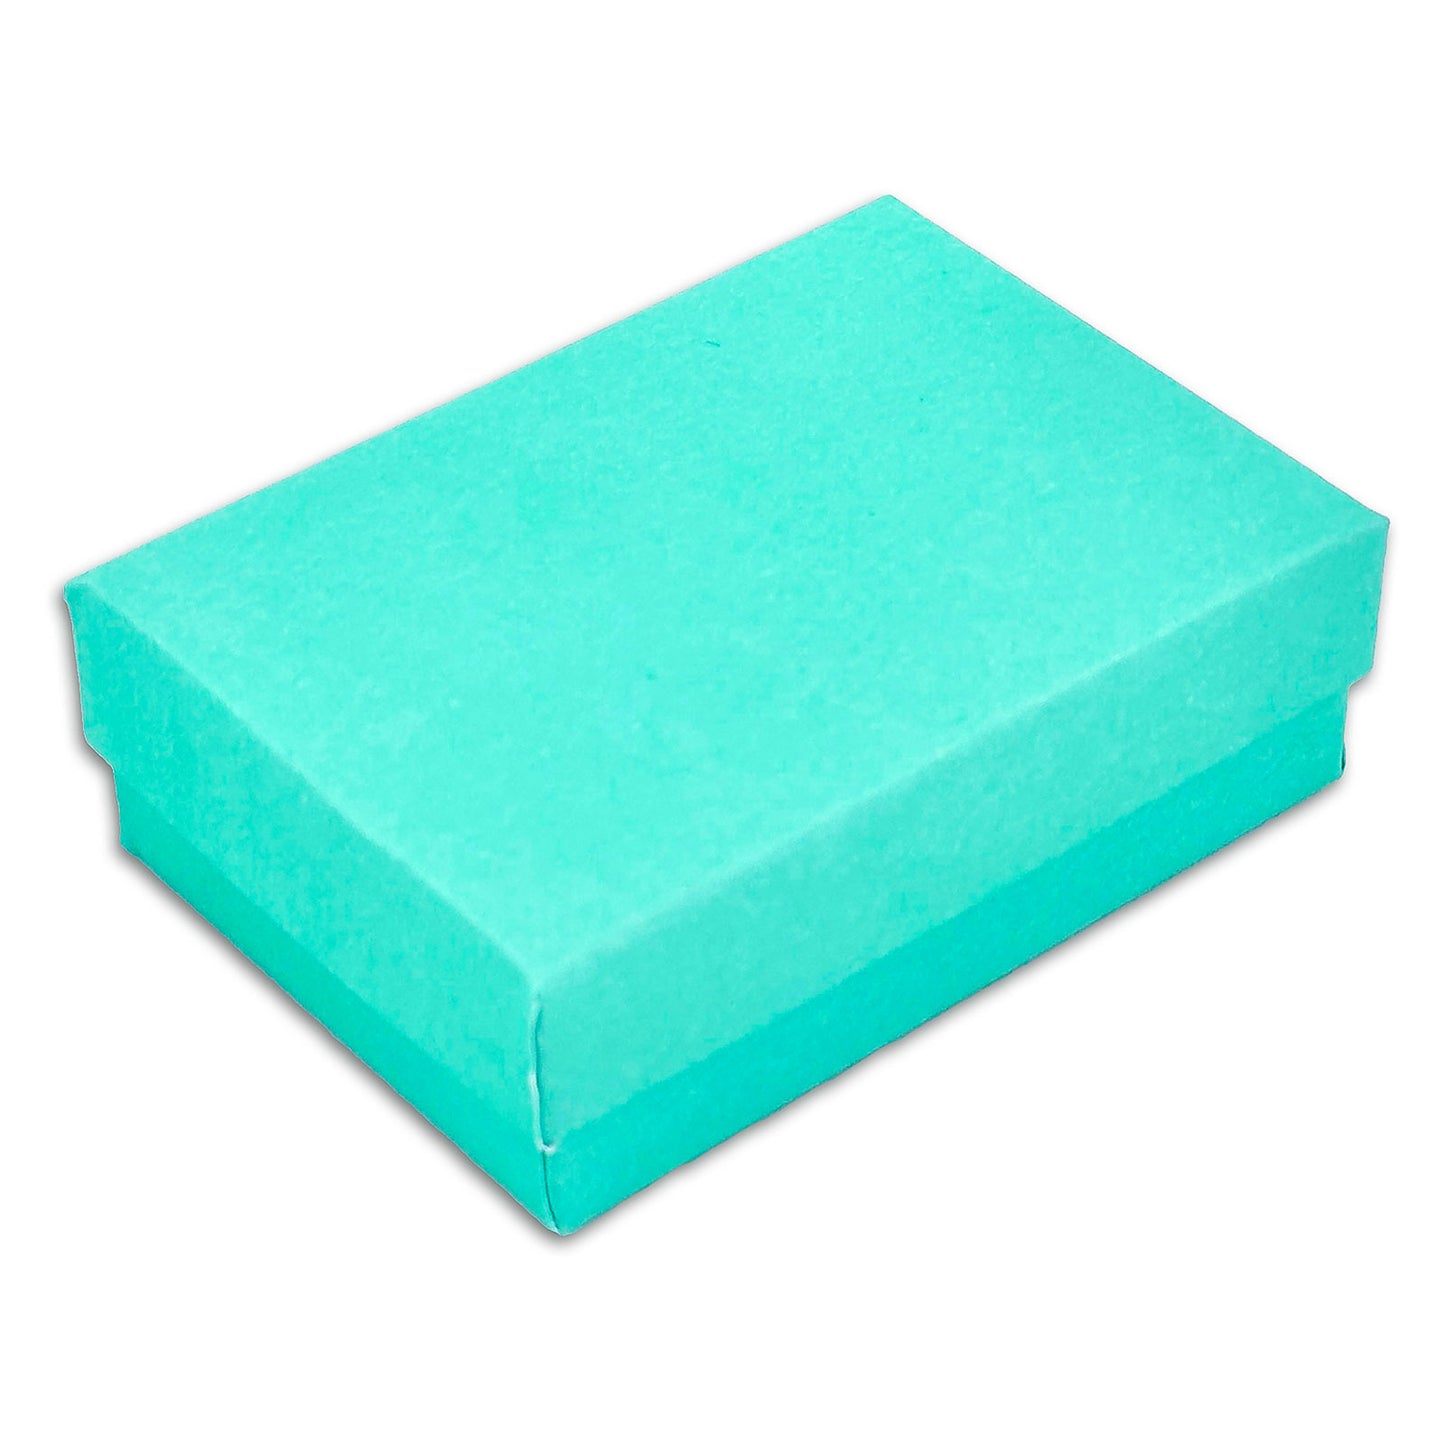 2 5/8" x 1 1/2" x 1" Teal Green Cotton Filled Paper Box